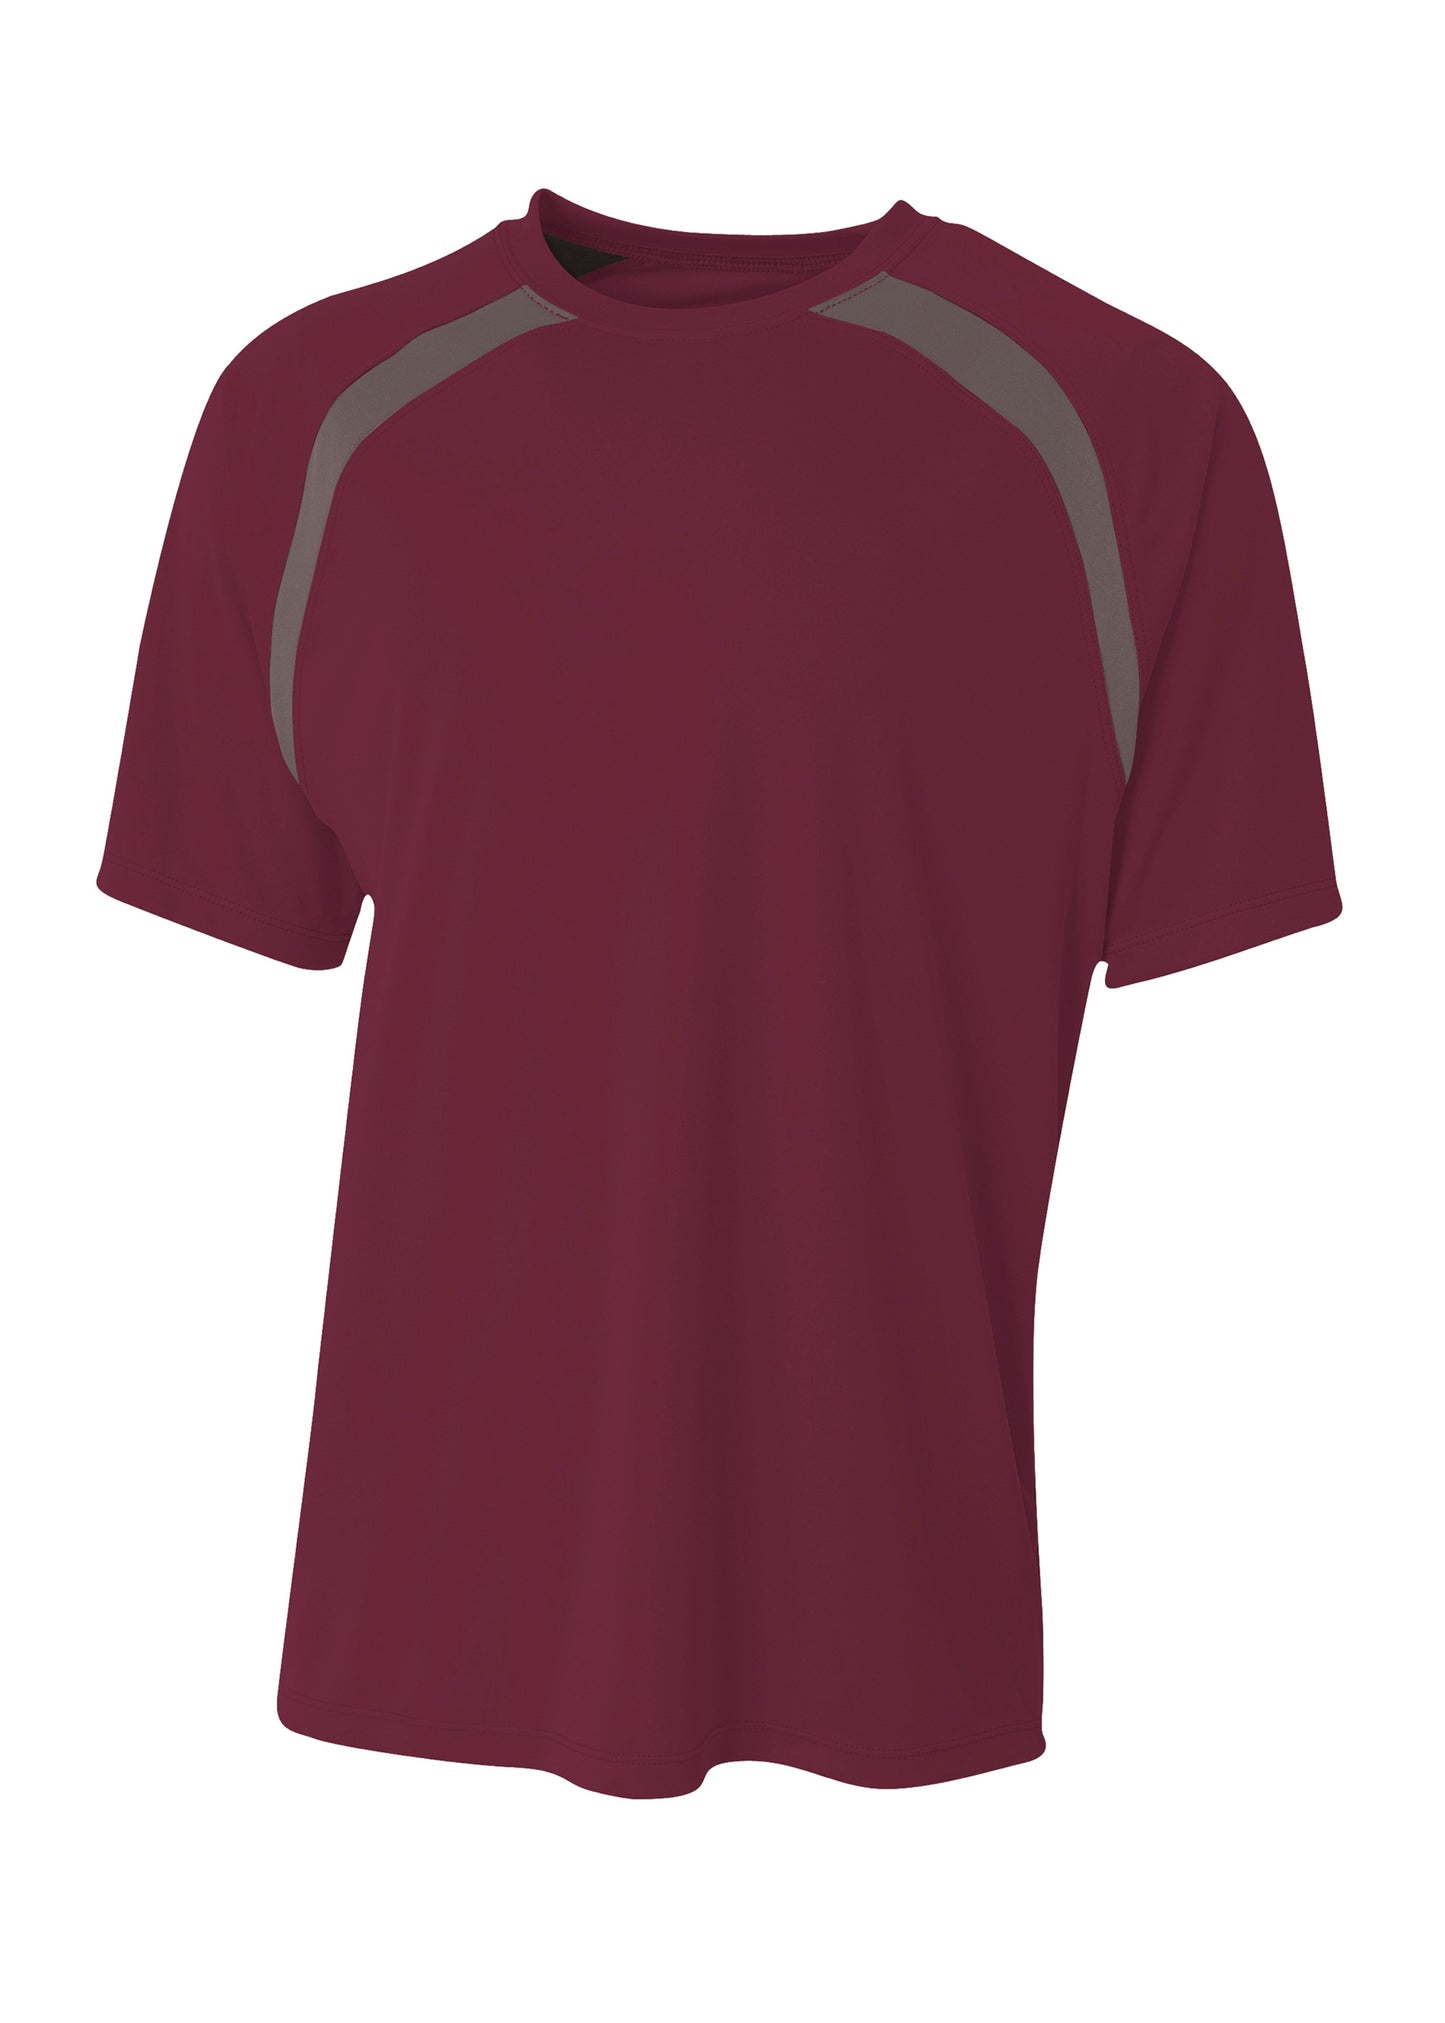 Photo of A4 SHIRTS NB3001  color  MAROON/GRAPHITE